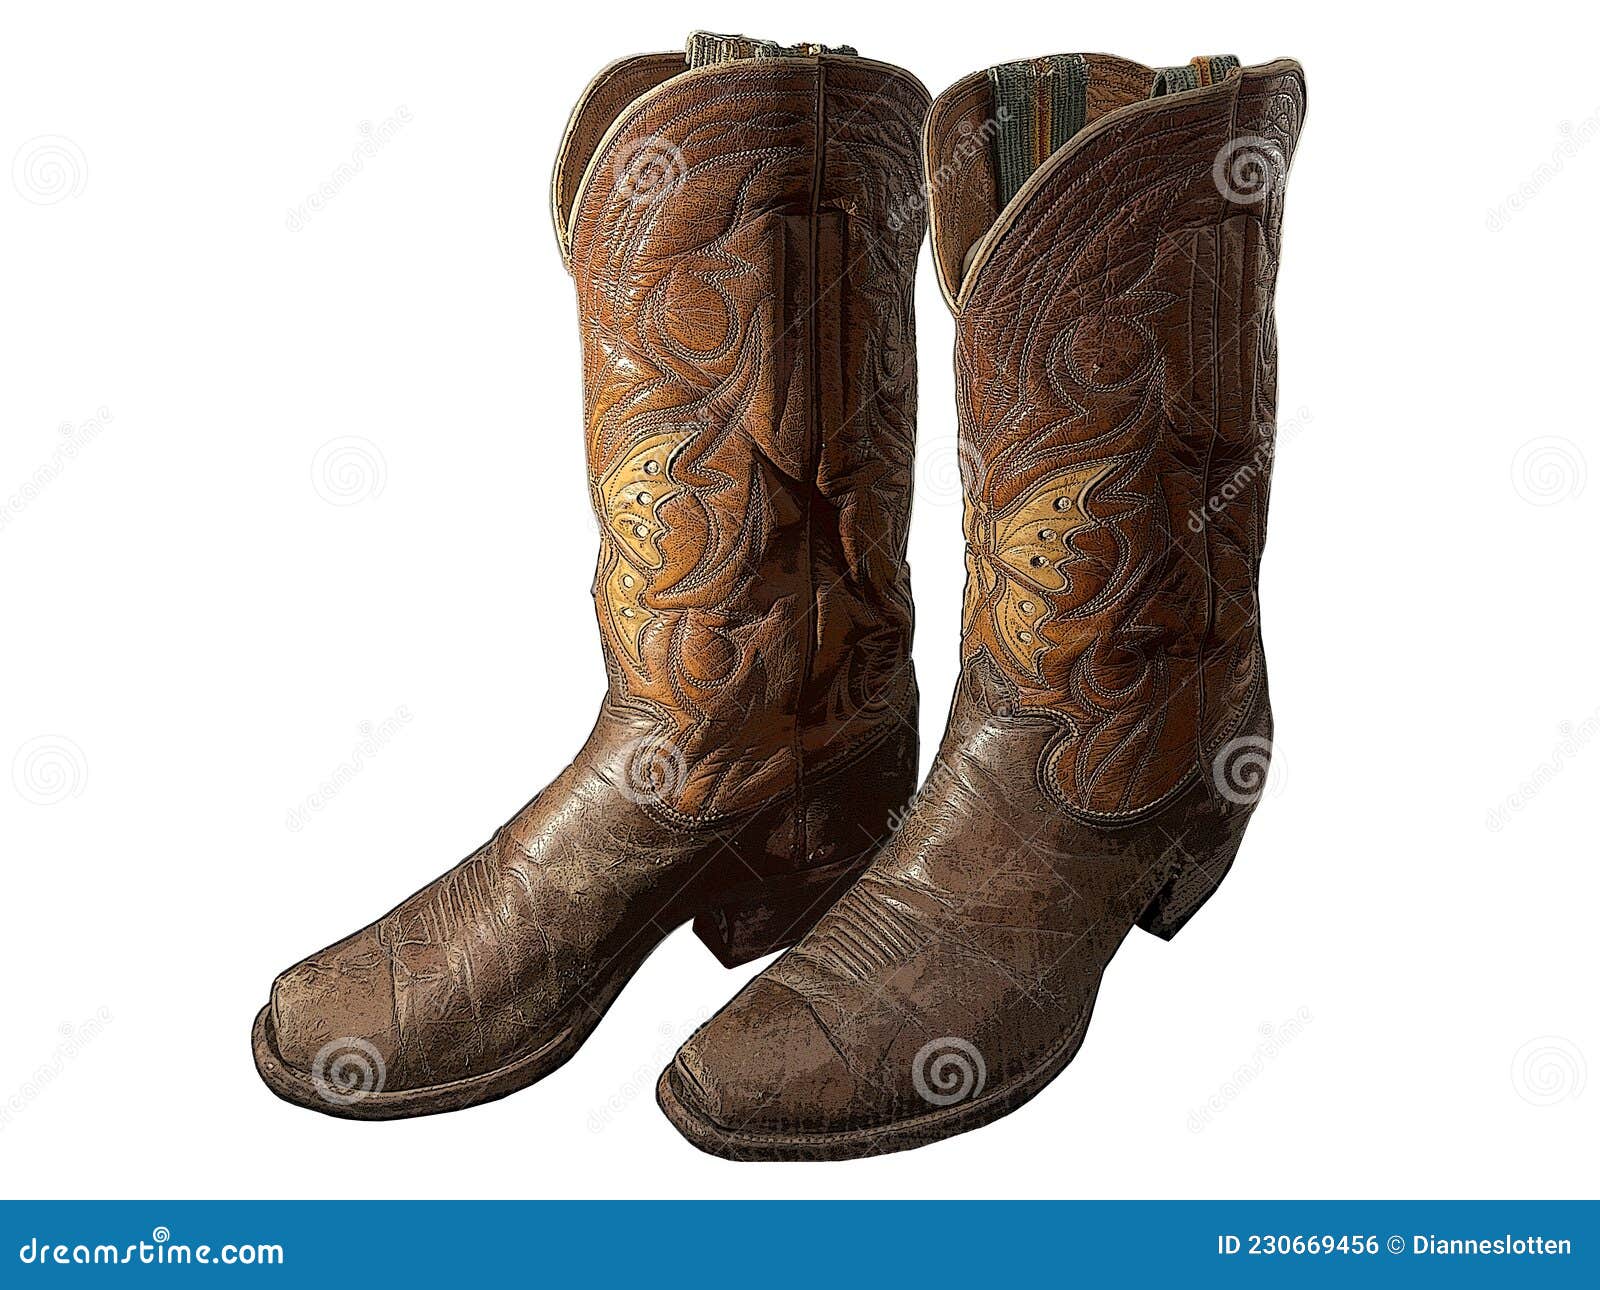  of a pair of vintage western cowboy boots  on white